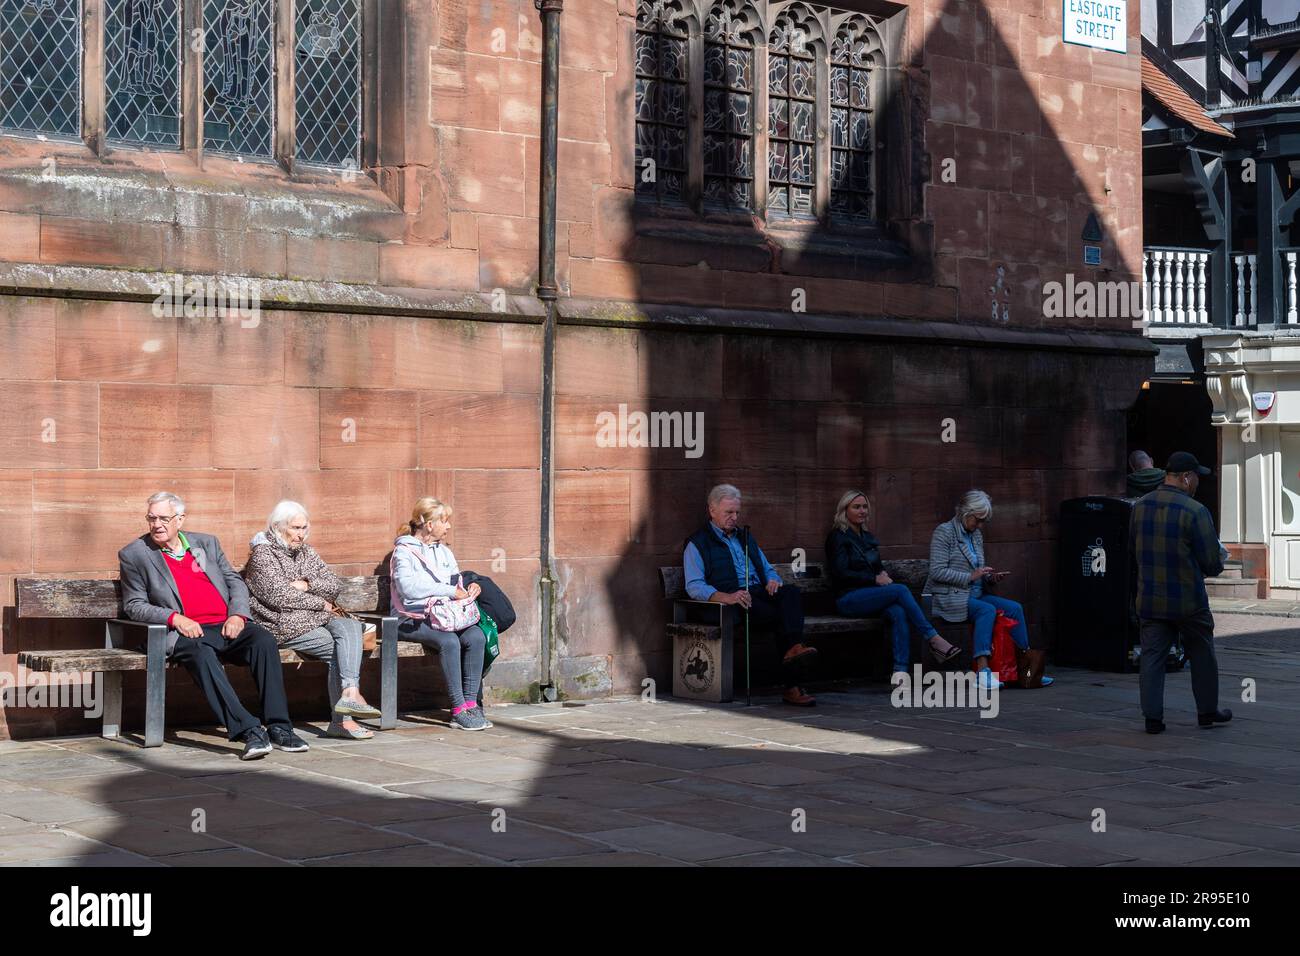 People sitting on benches in sunlight and shade, Chester, Cheshire, UK. Stock Photo